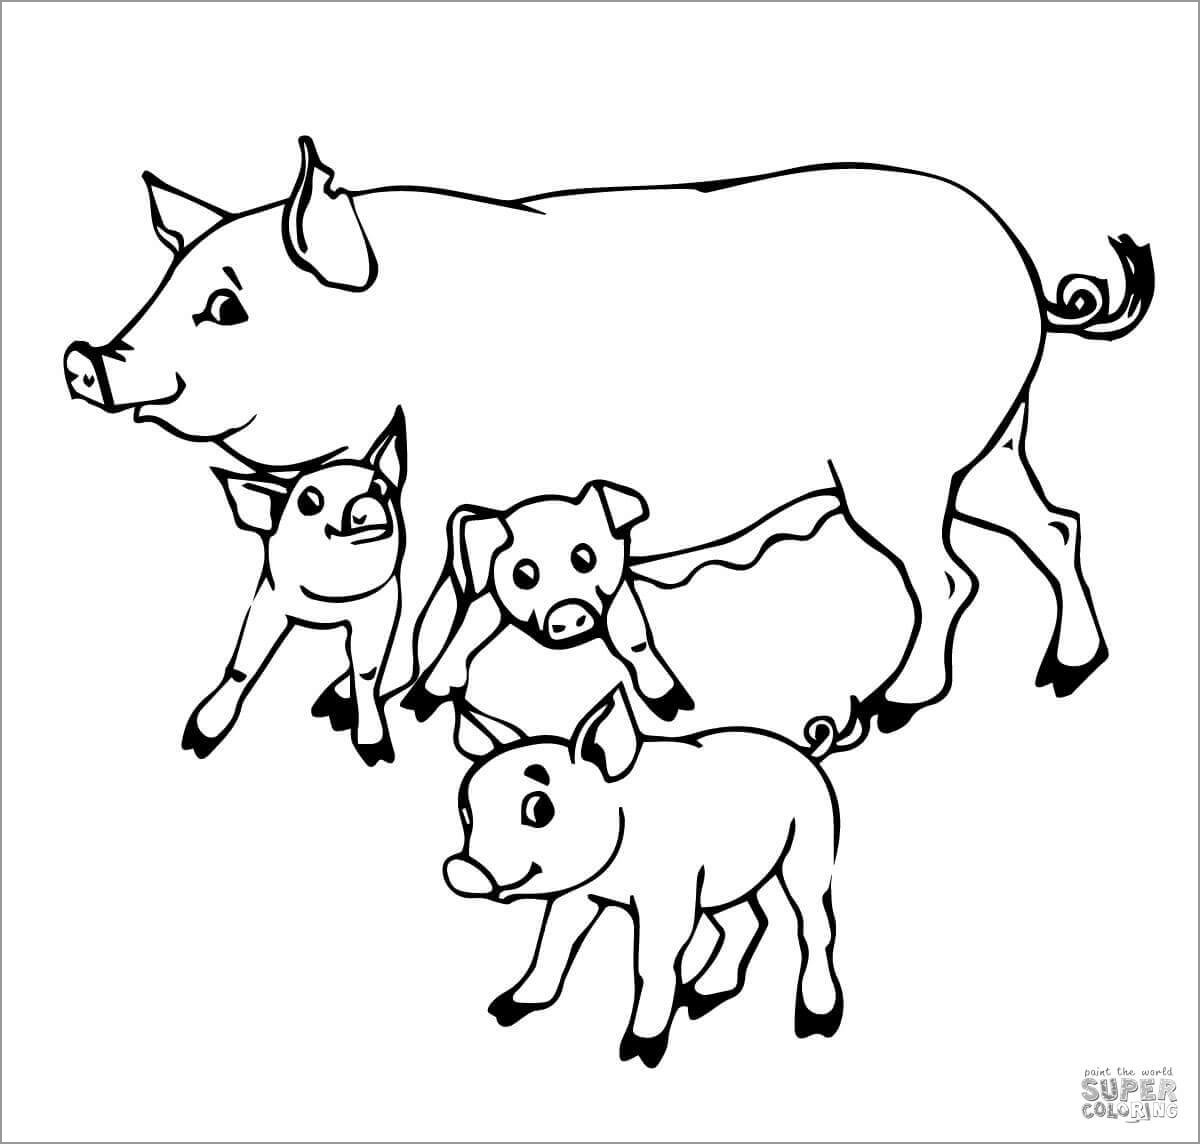 Baby Pig Cute Pig Coloring Pages : Free Printable Pig Coloring Pages